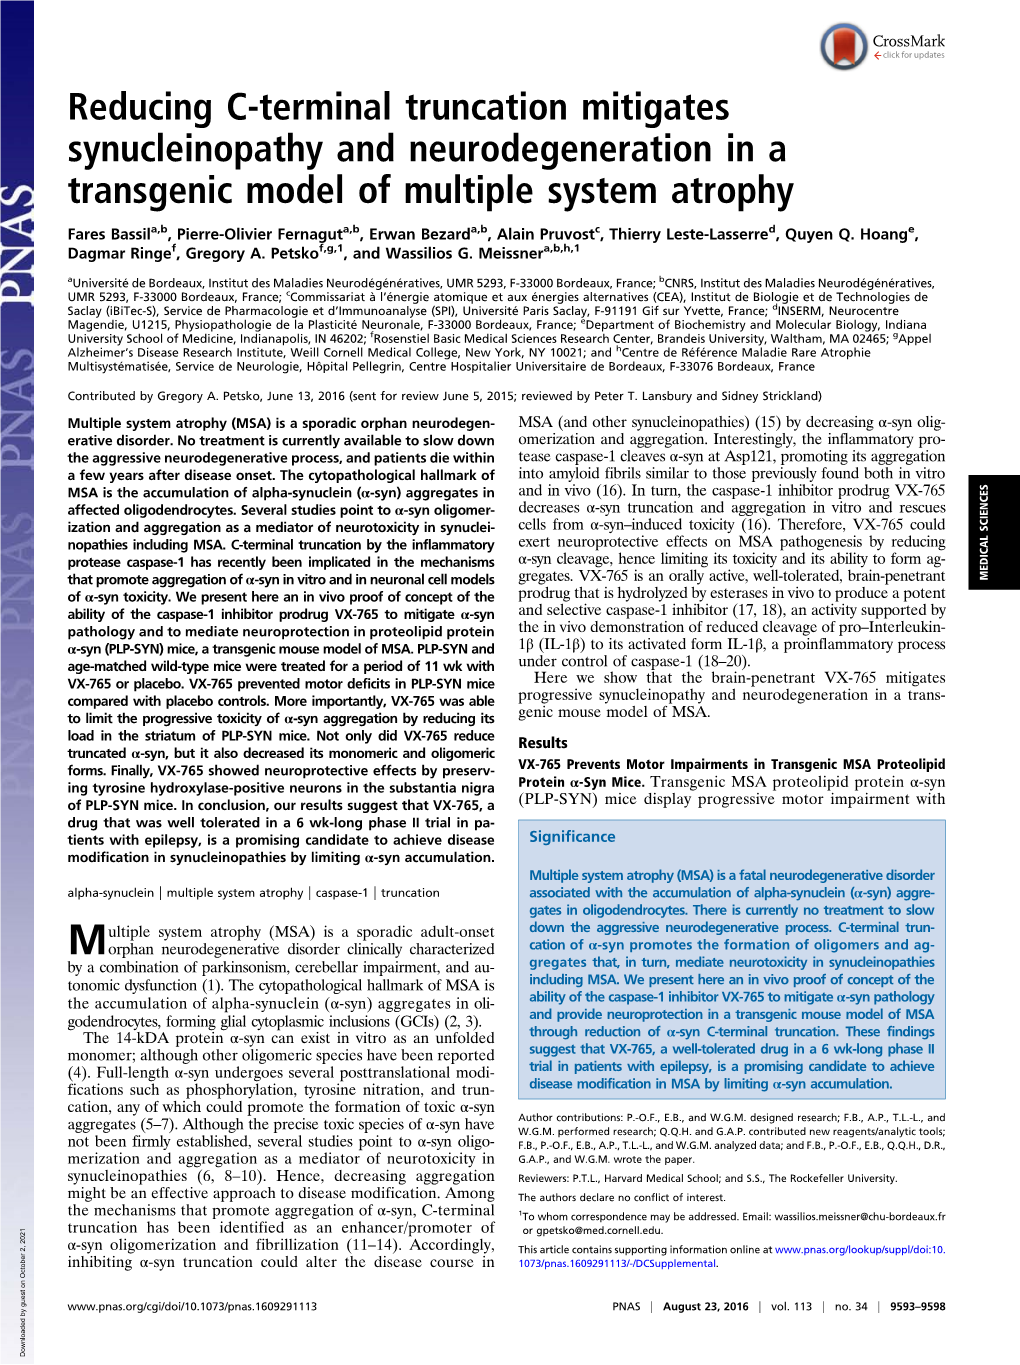 Reducing C-Terminal Truncation Mitigates Synucleinopathy and Neurodegeneration in a Transgenic Model of Multiple System Atrophy